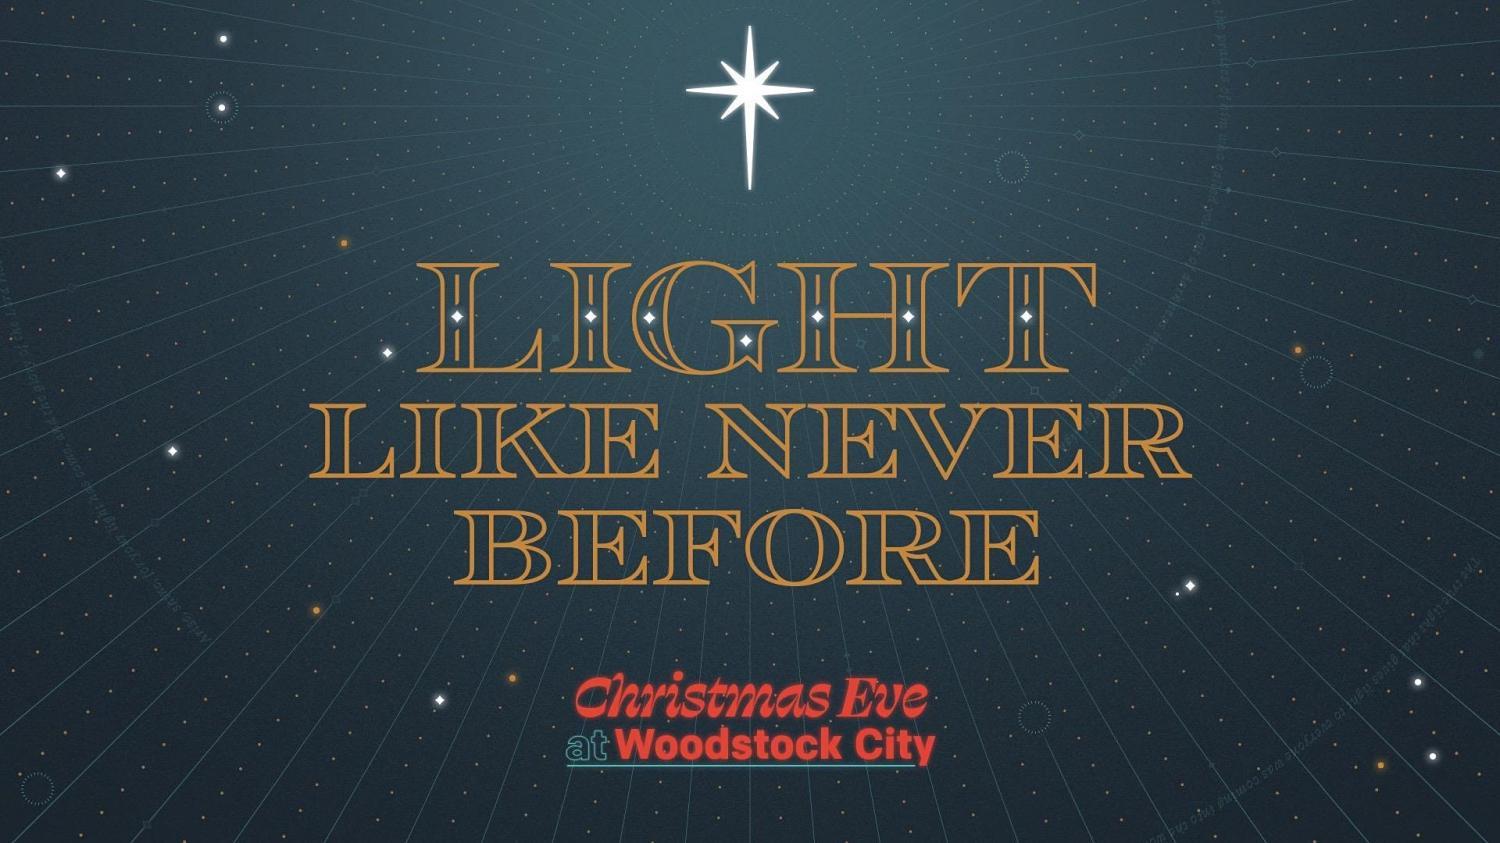 Light Like Never Before - Christmas Services at Woodstock City Church